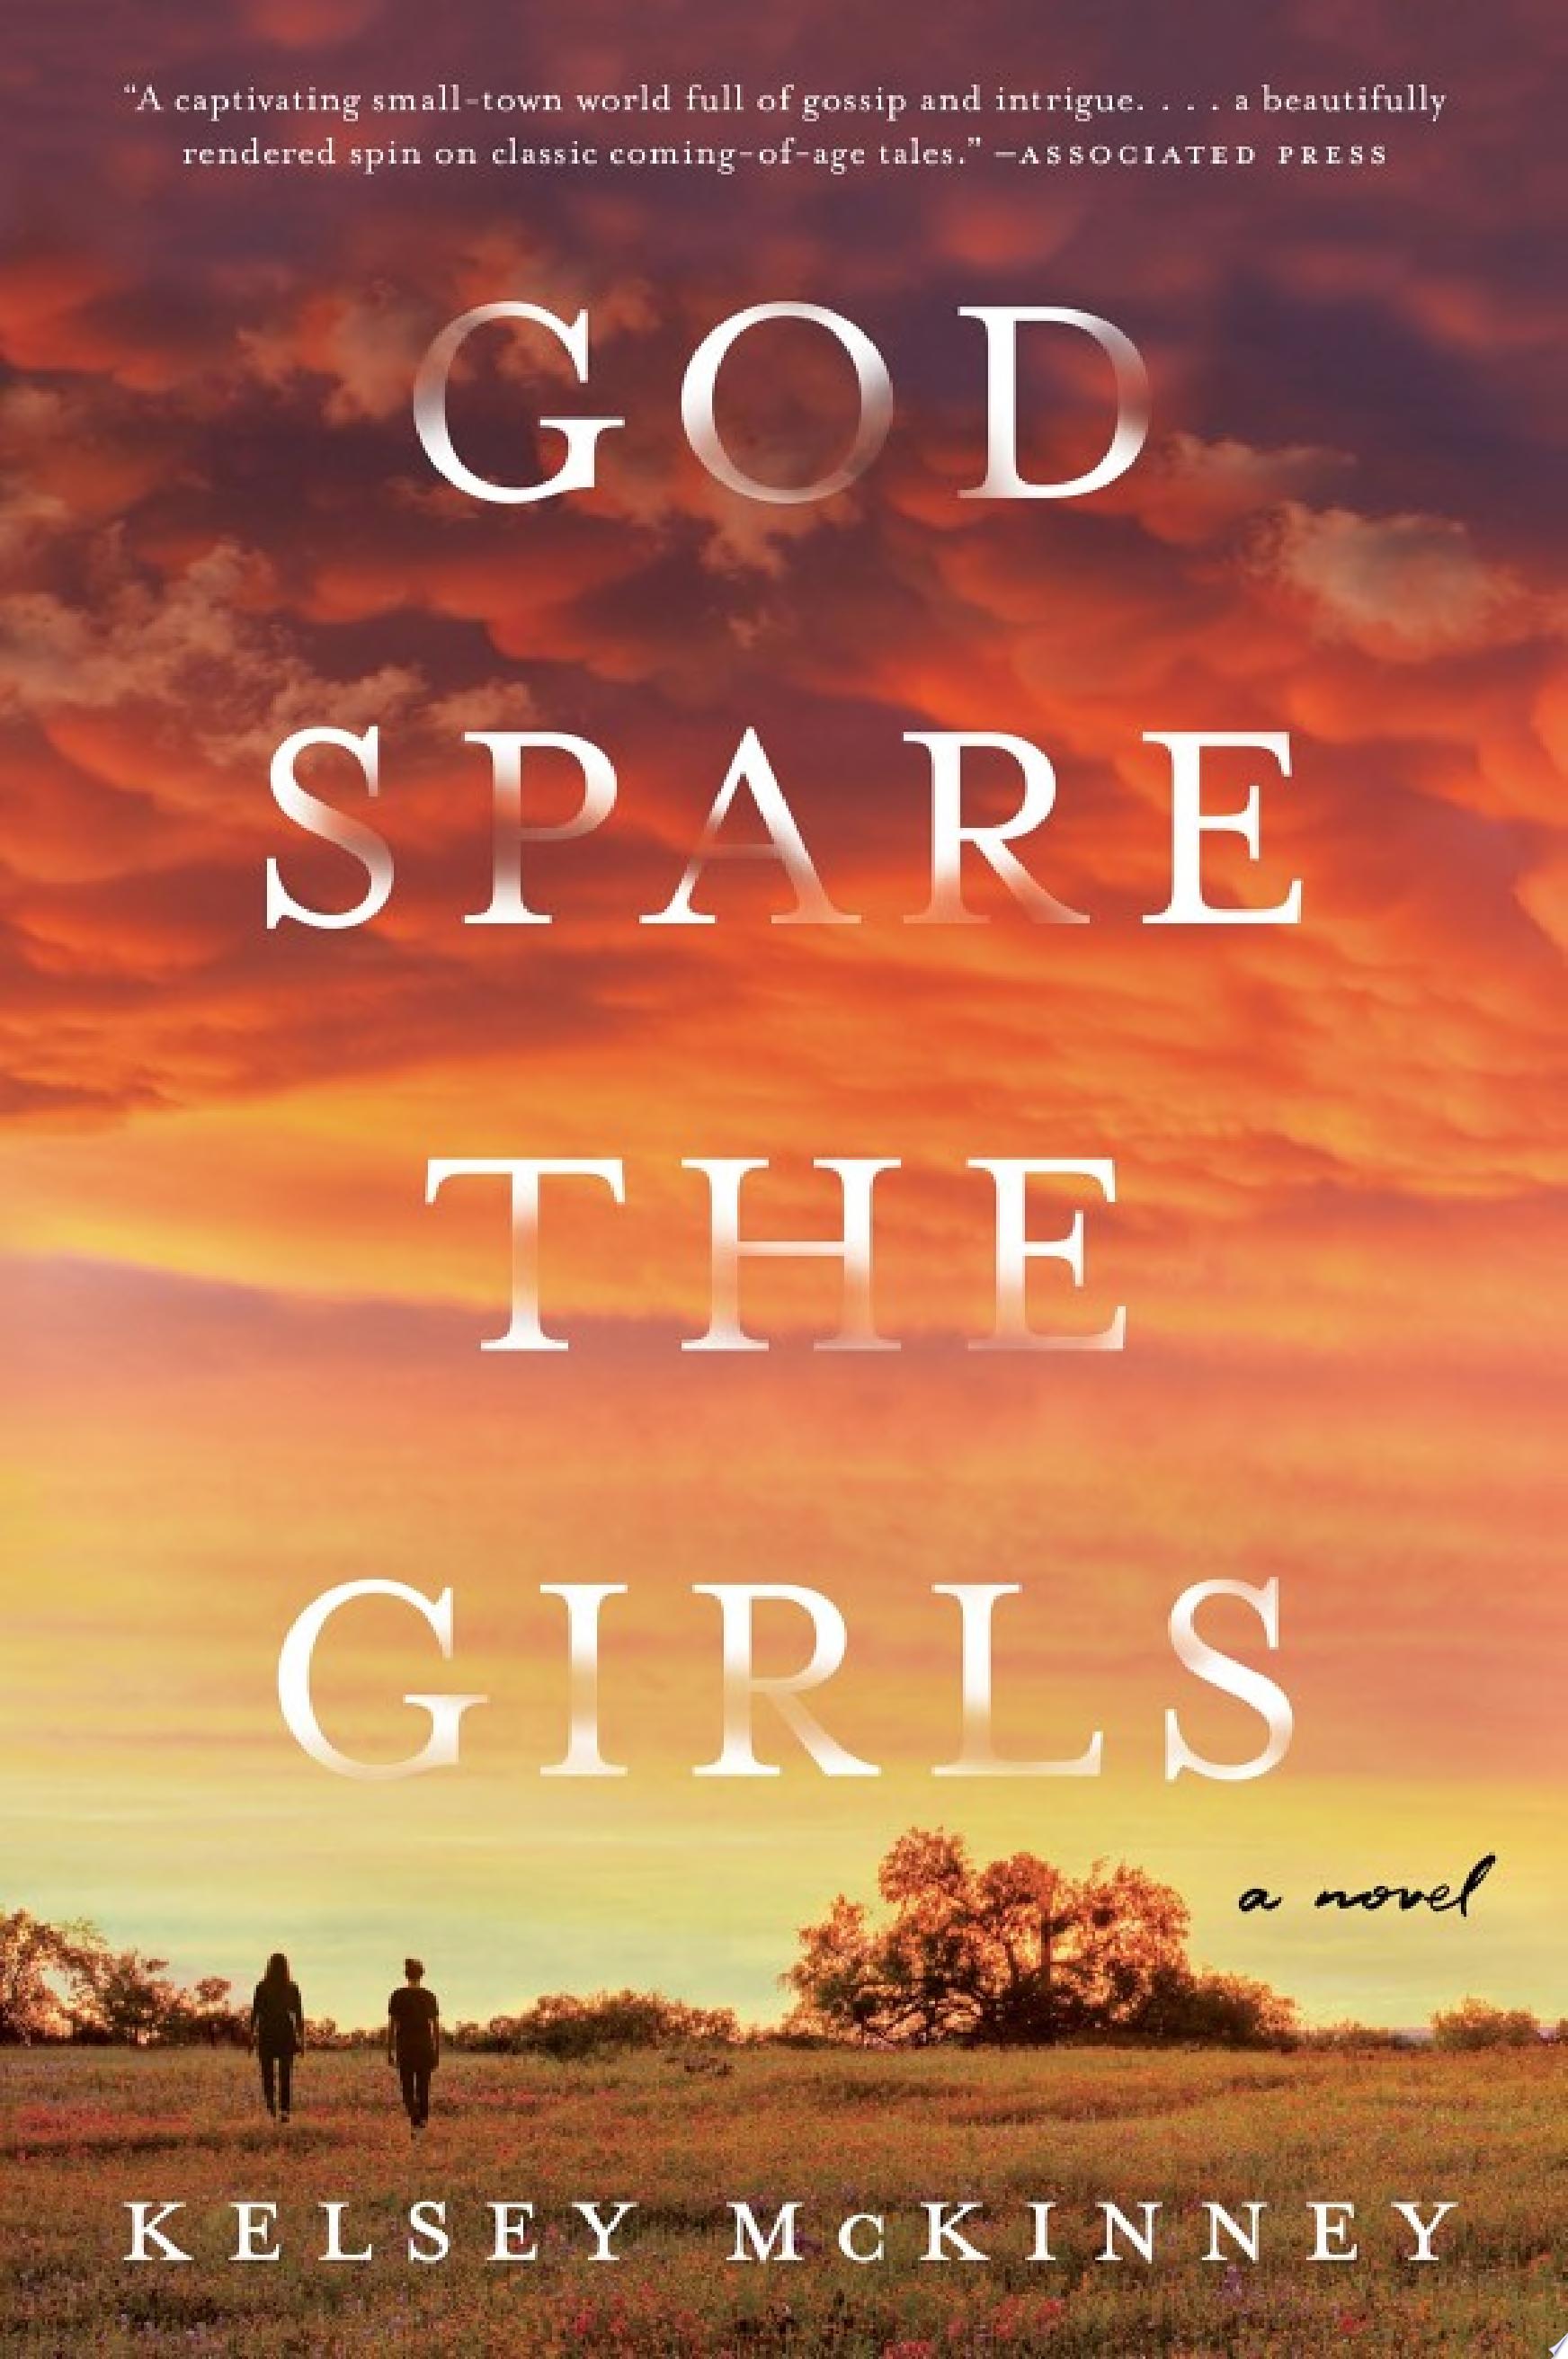 Image for "God Spare the Girls"